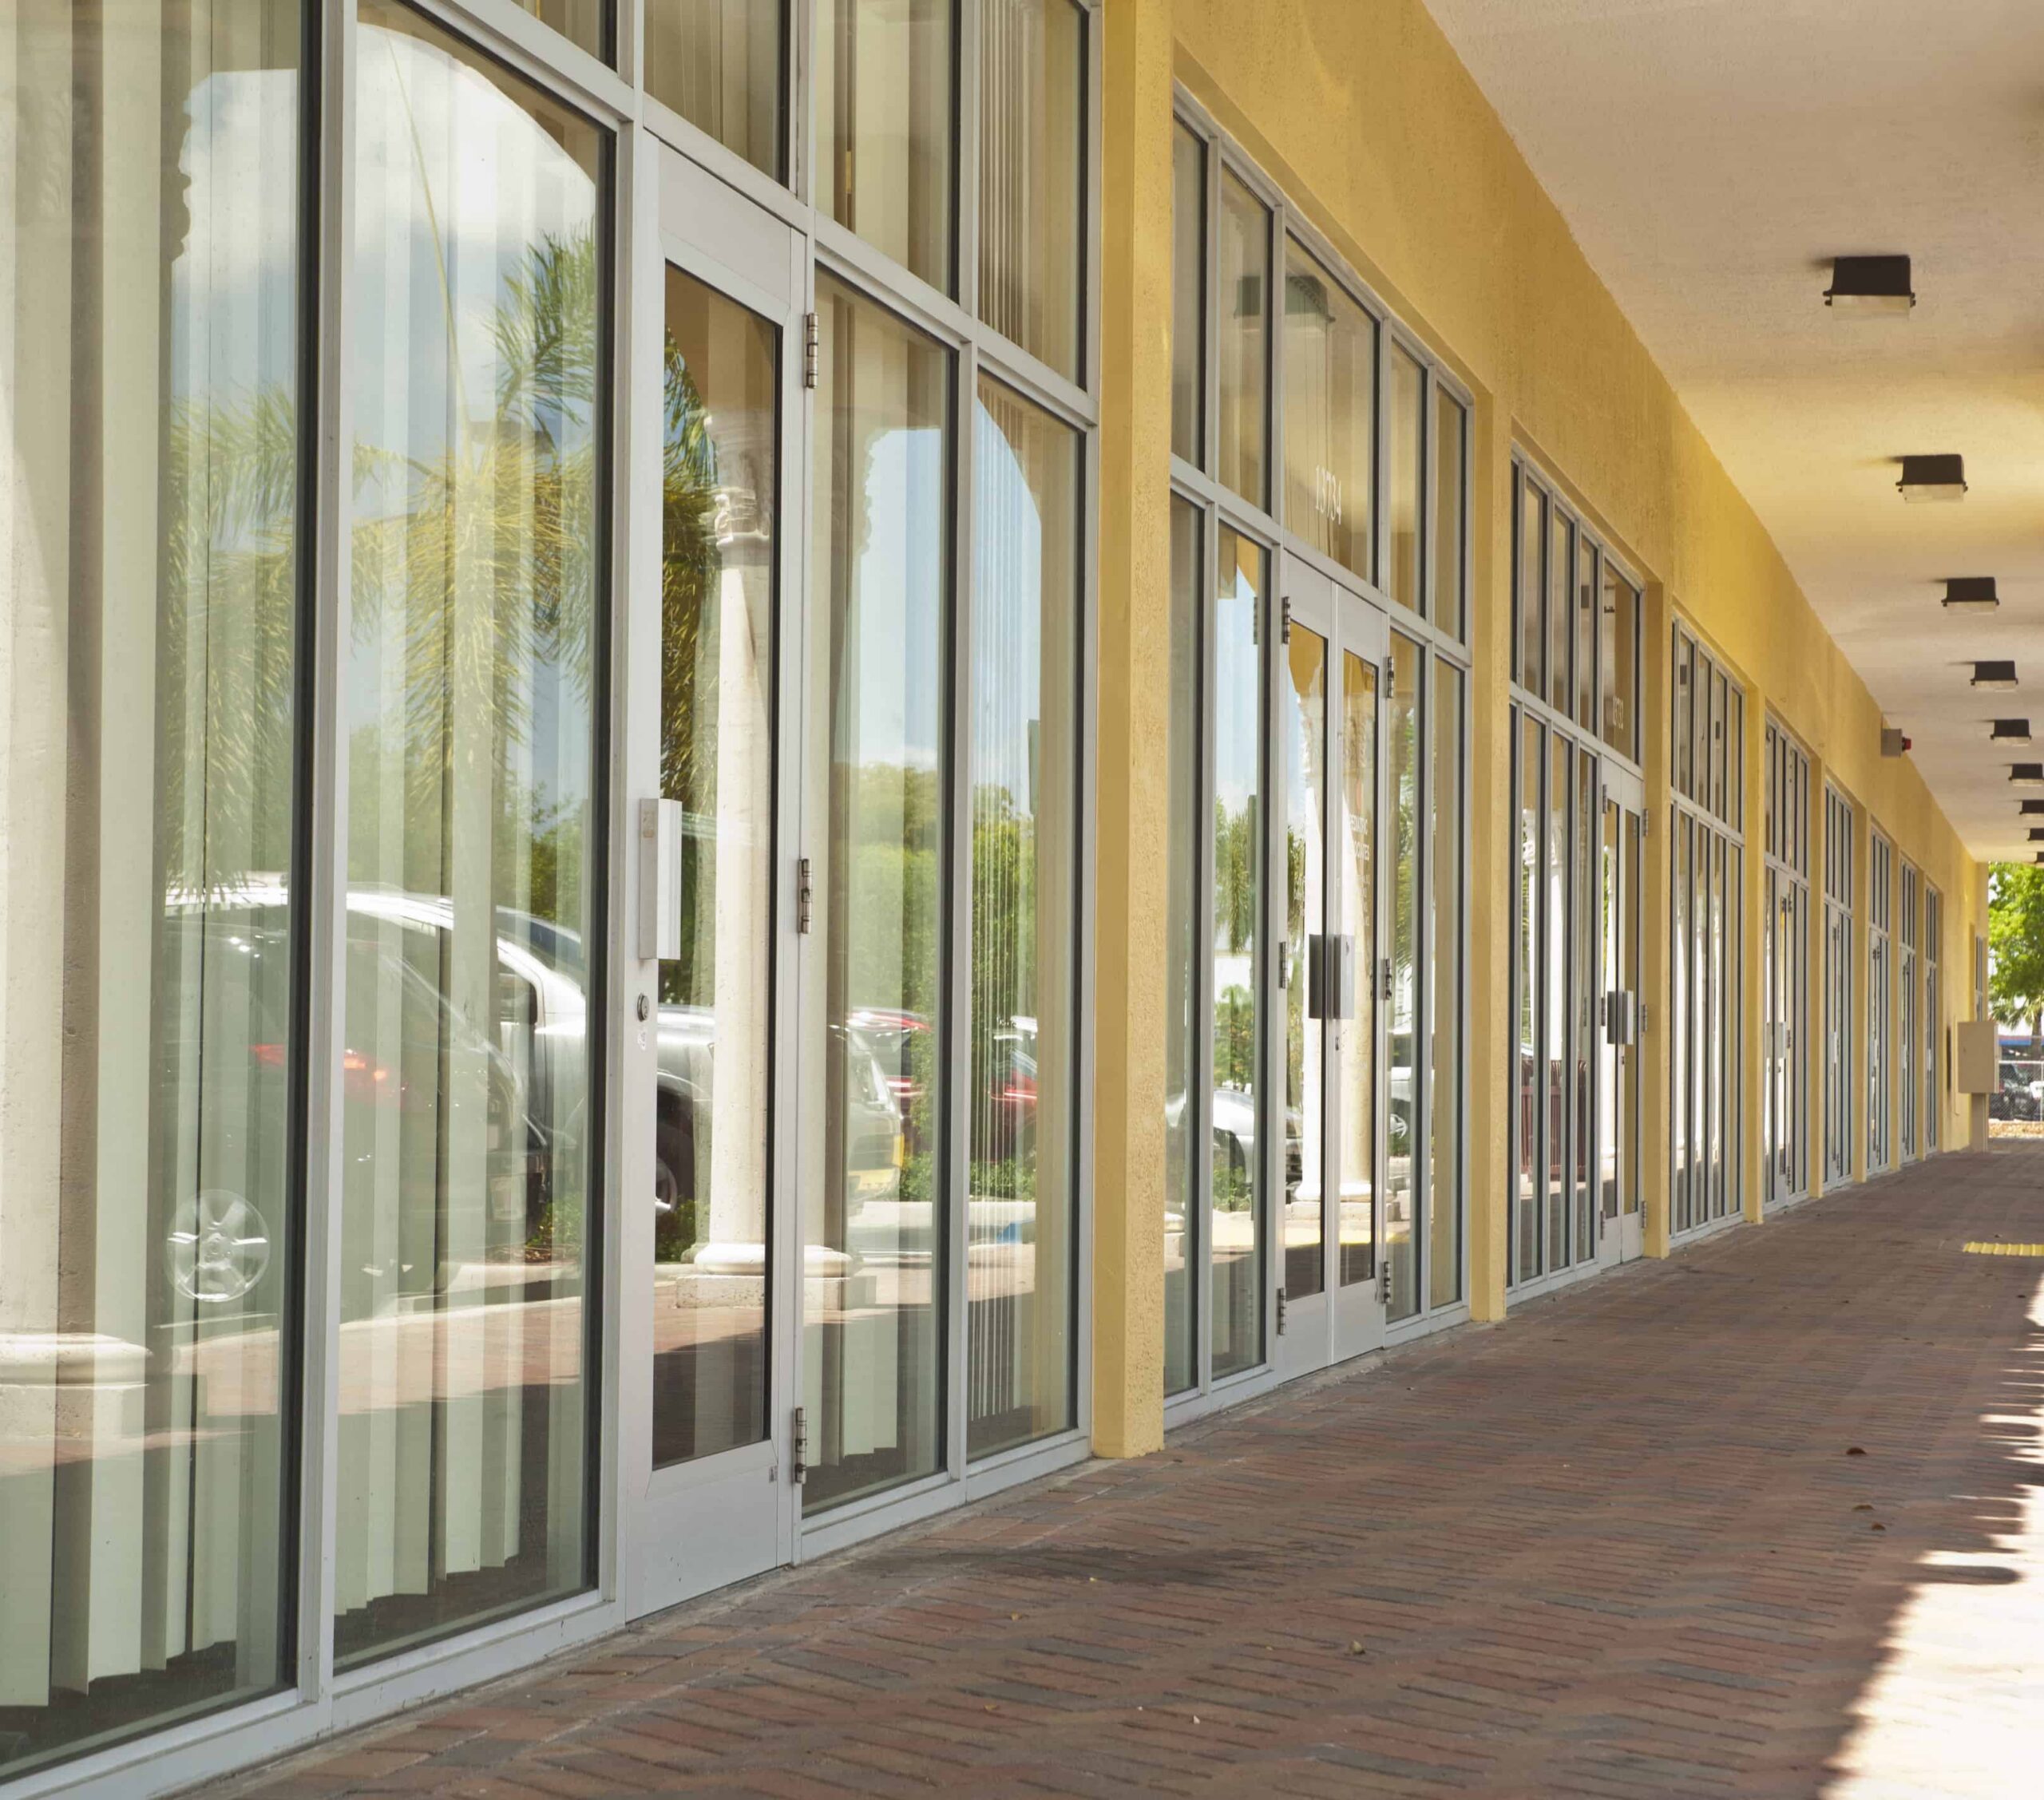 Windows and Aldora non-impact glass doors line the wall of orange building. Brick paved patio with covering runs in front of the doors.